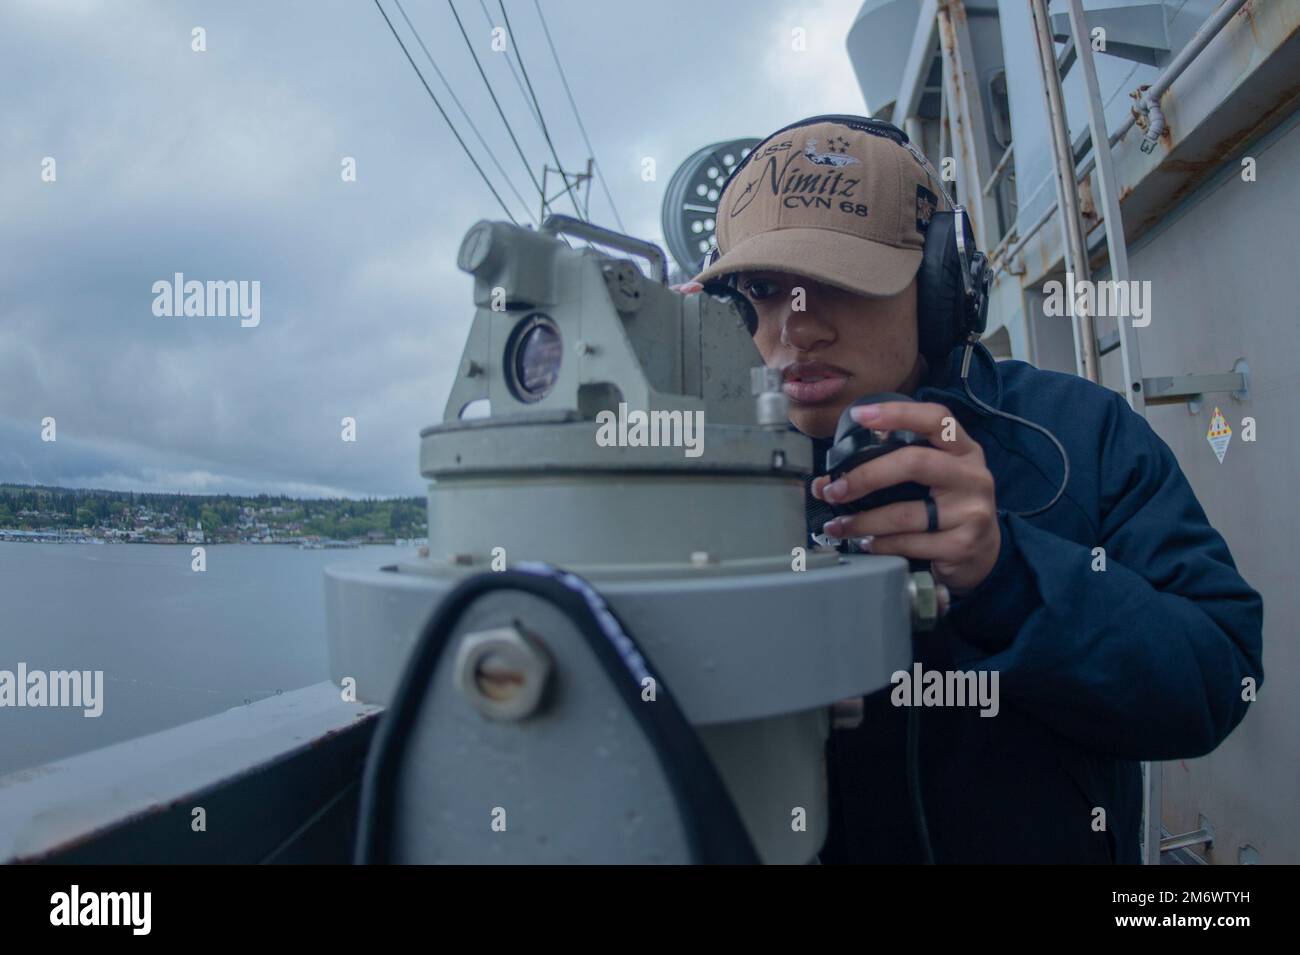 220507-N-KU796-1043 PUGET SOUND WASH., (May 07, 2022) Quartermaster Seaman Gaea Kohles, from Savannah, Ga., uses a telescopic alidade to locate navigational aids as the aircraft carrier USS Nimitz (CVN 68) gets underway. Nimitz is underway conducting routine operations. Stock Photo